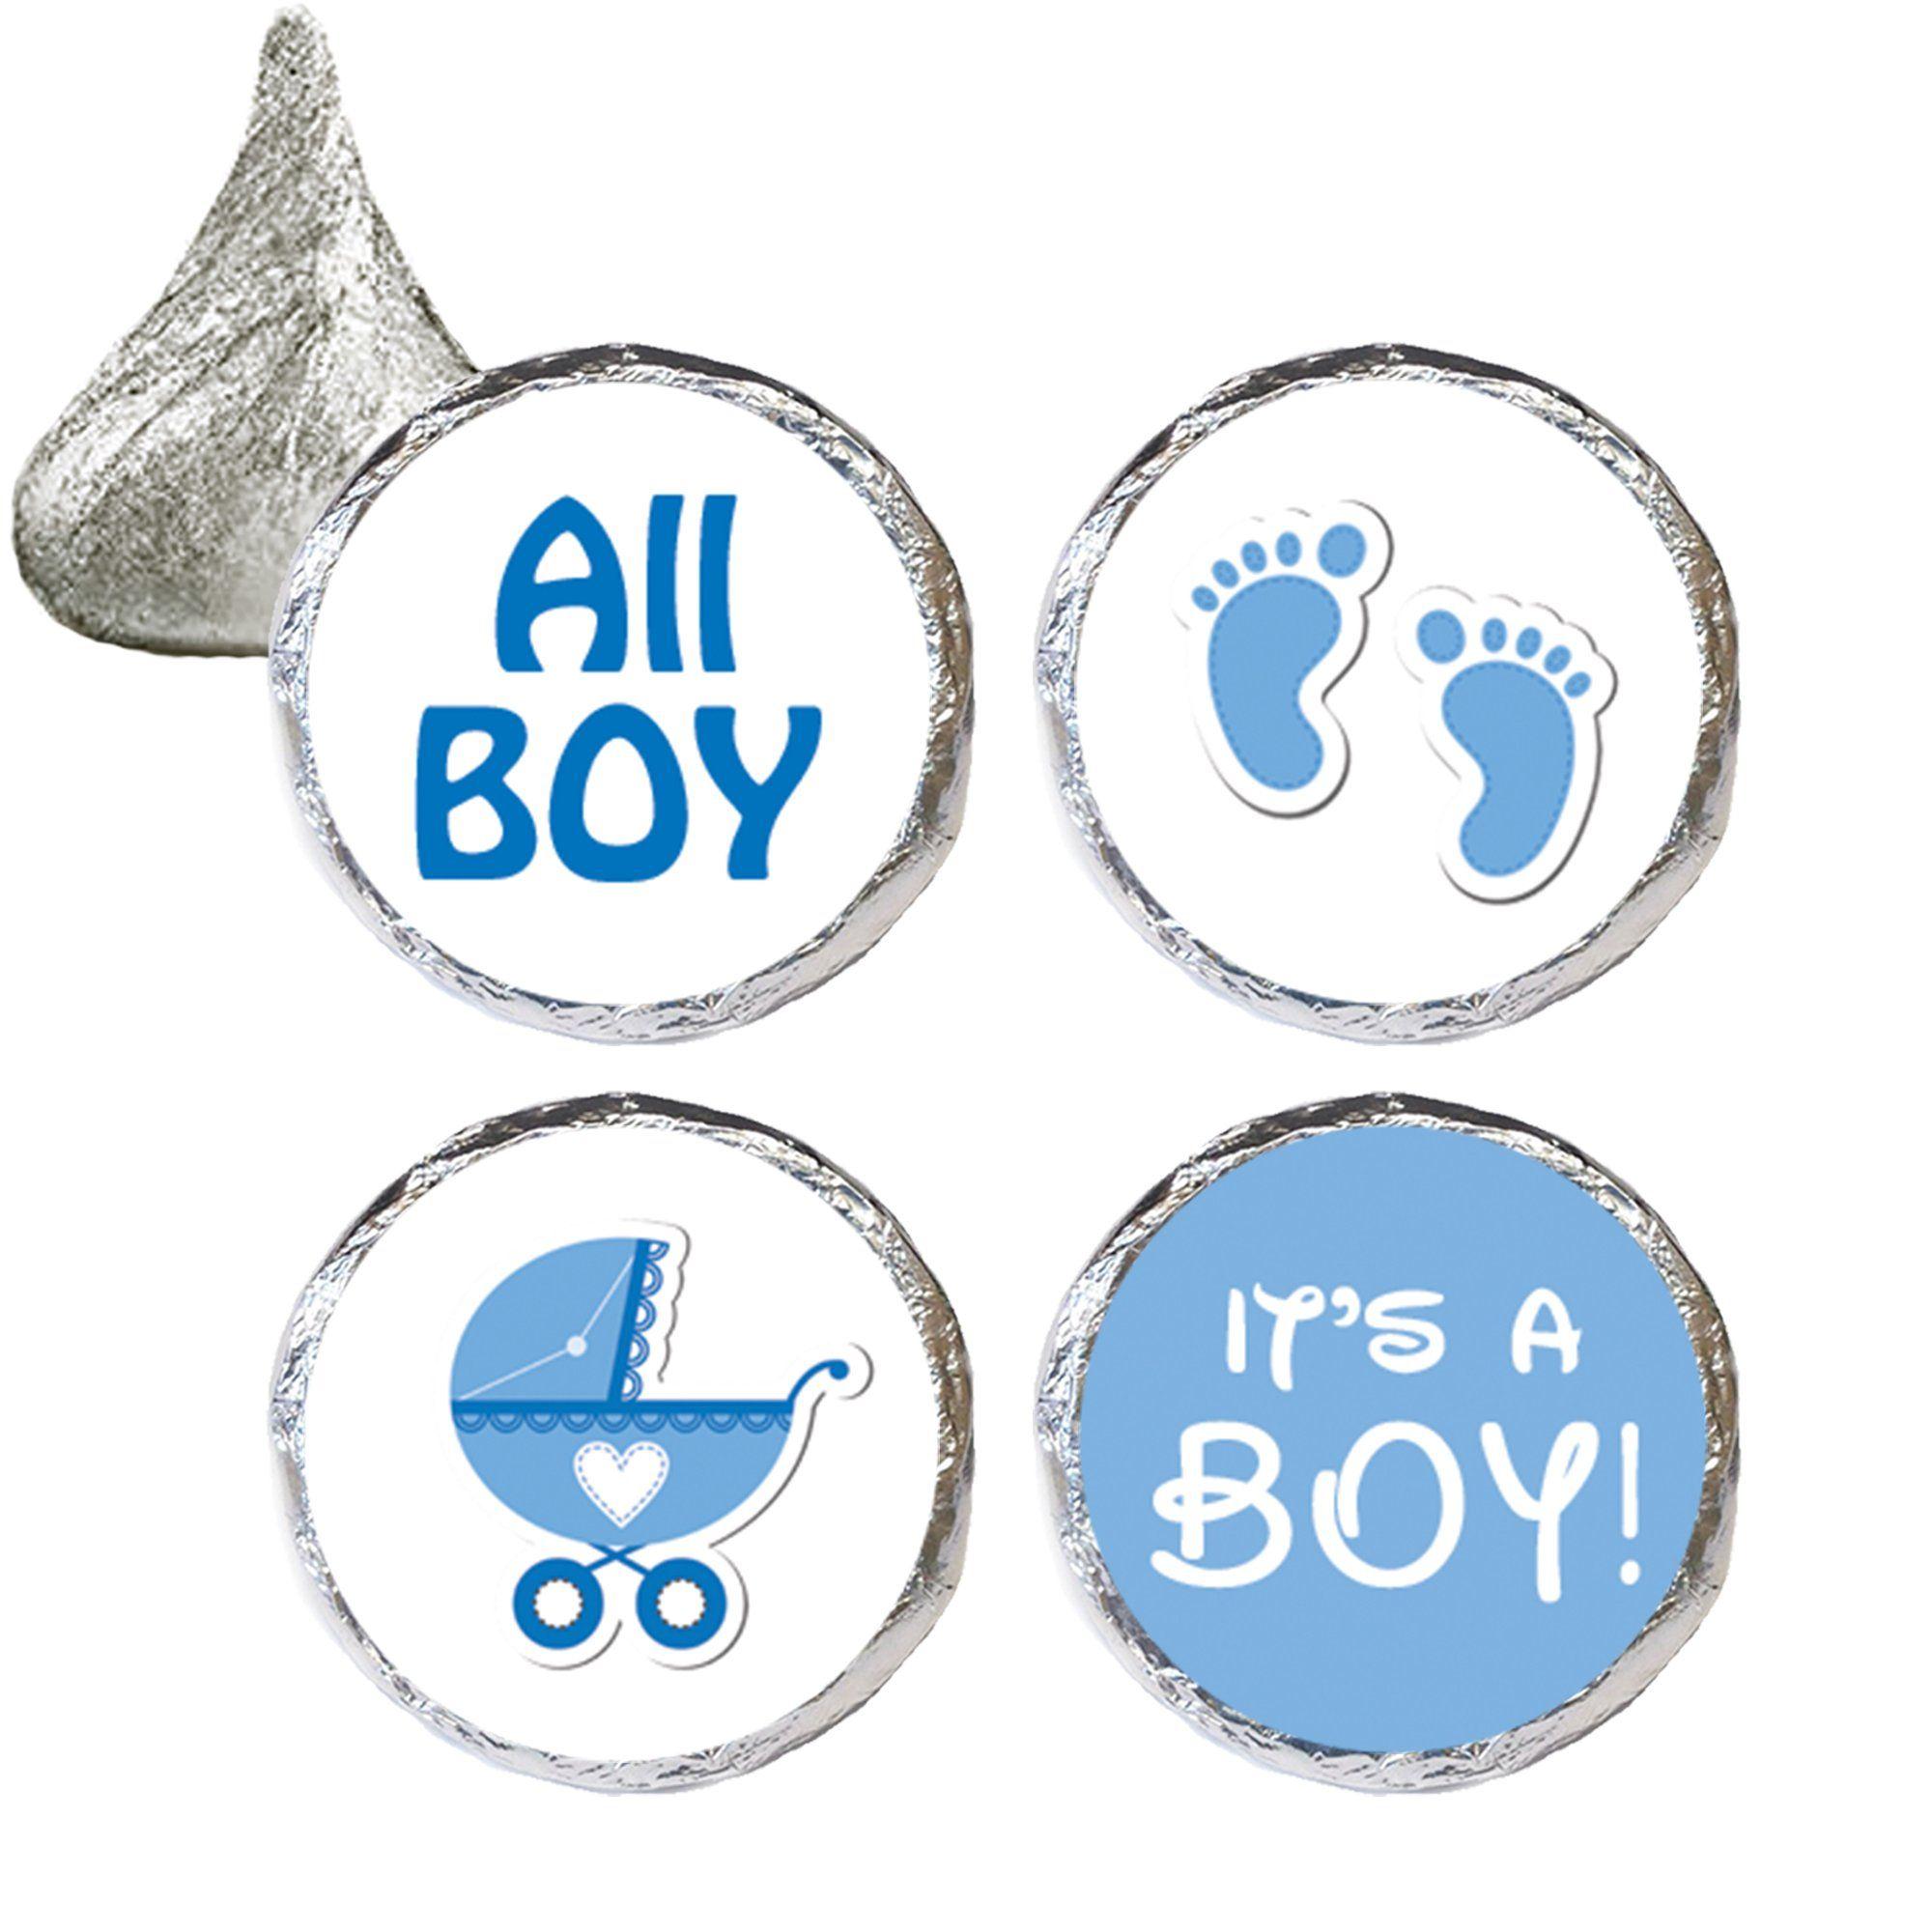 Blue Baby Logo - Amazon.com: Boy Baby Shower Favors 324 Stickers for Kisses Candies ...